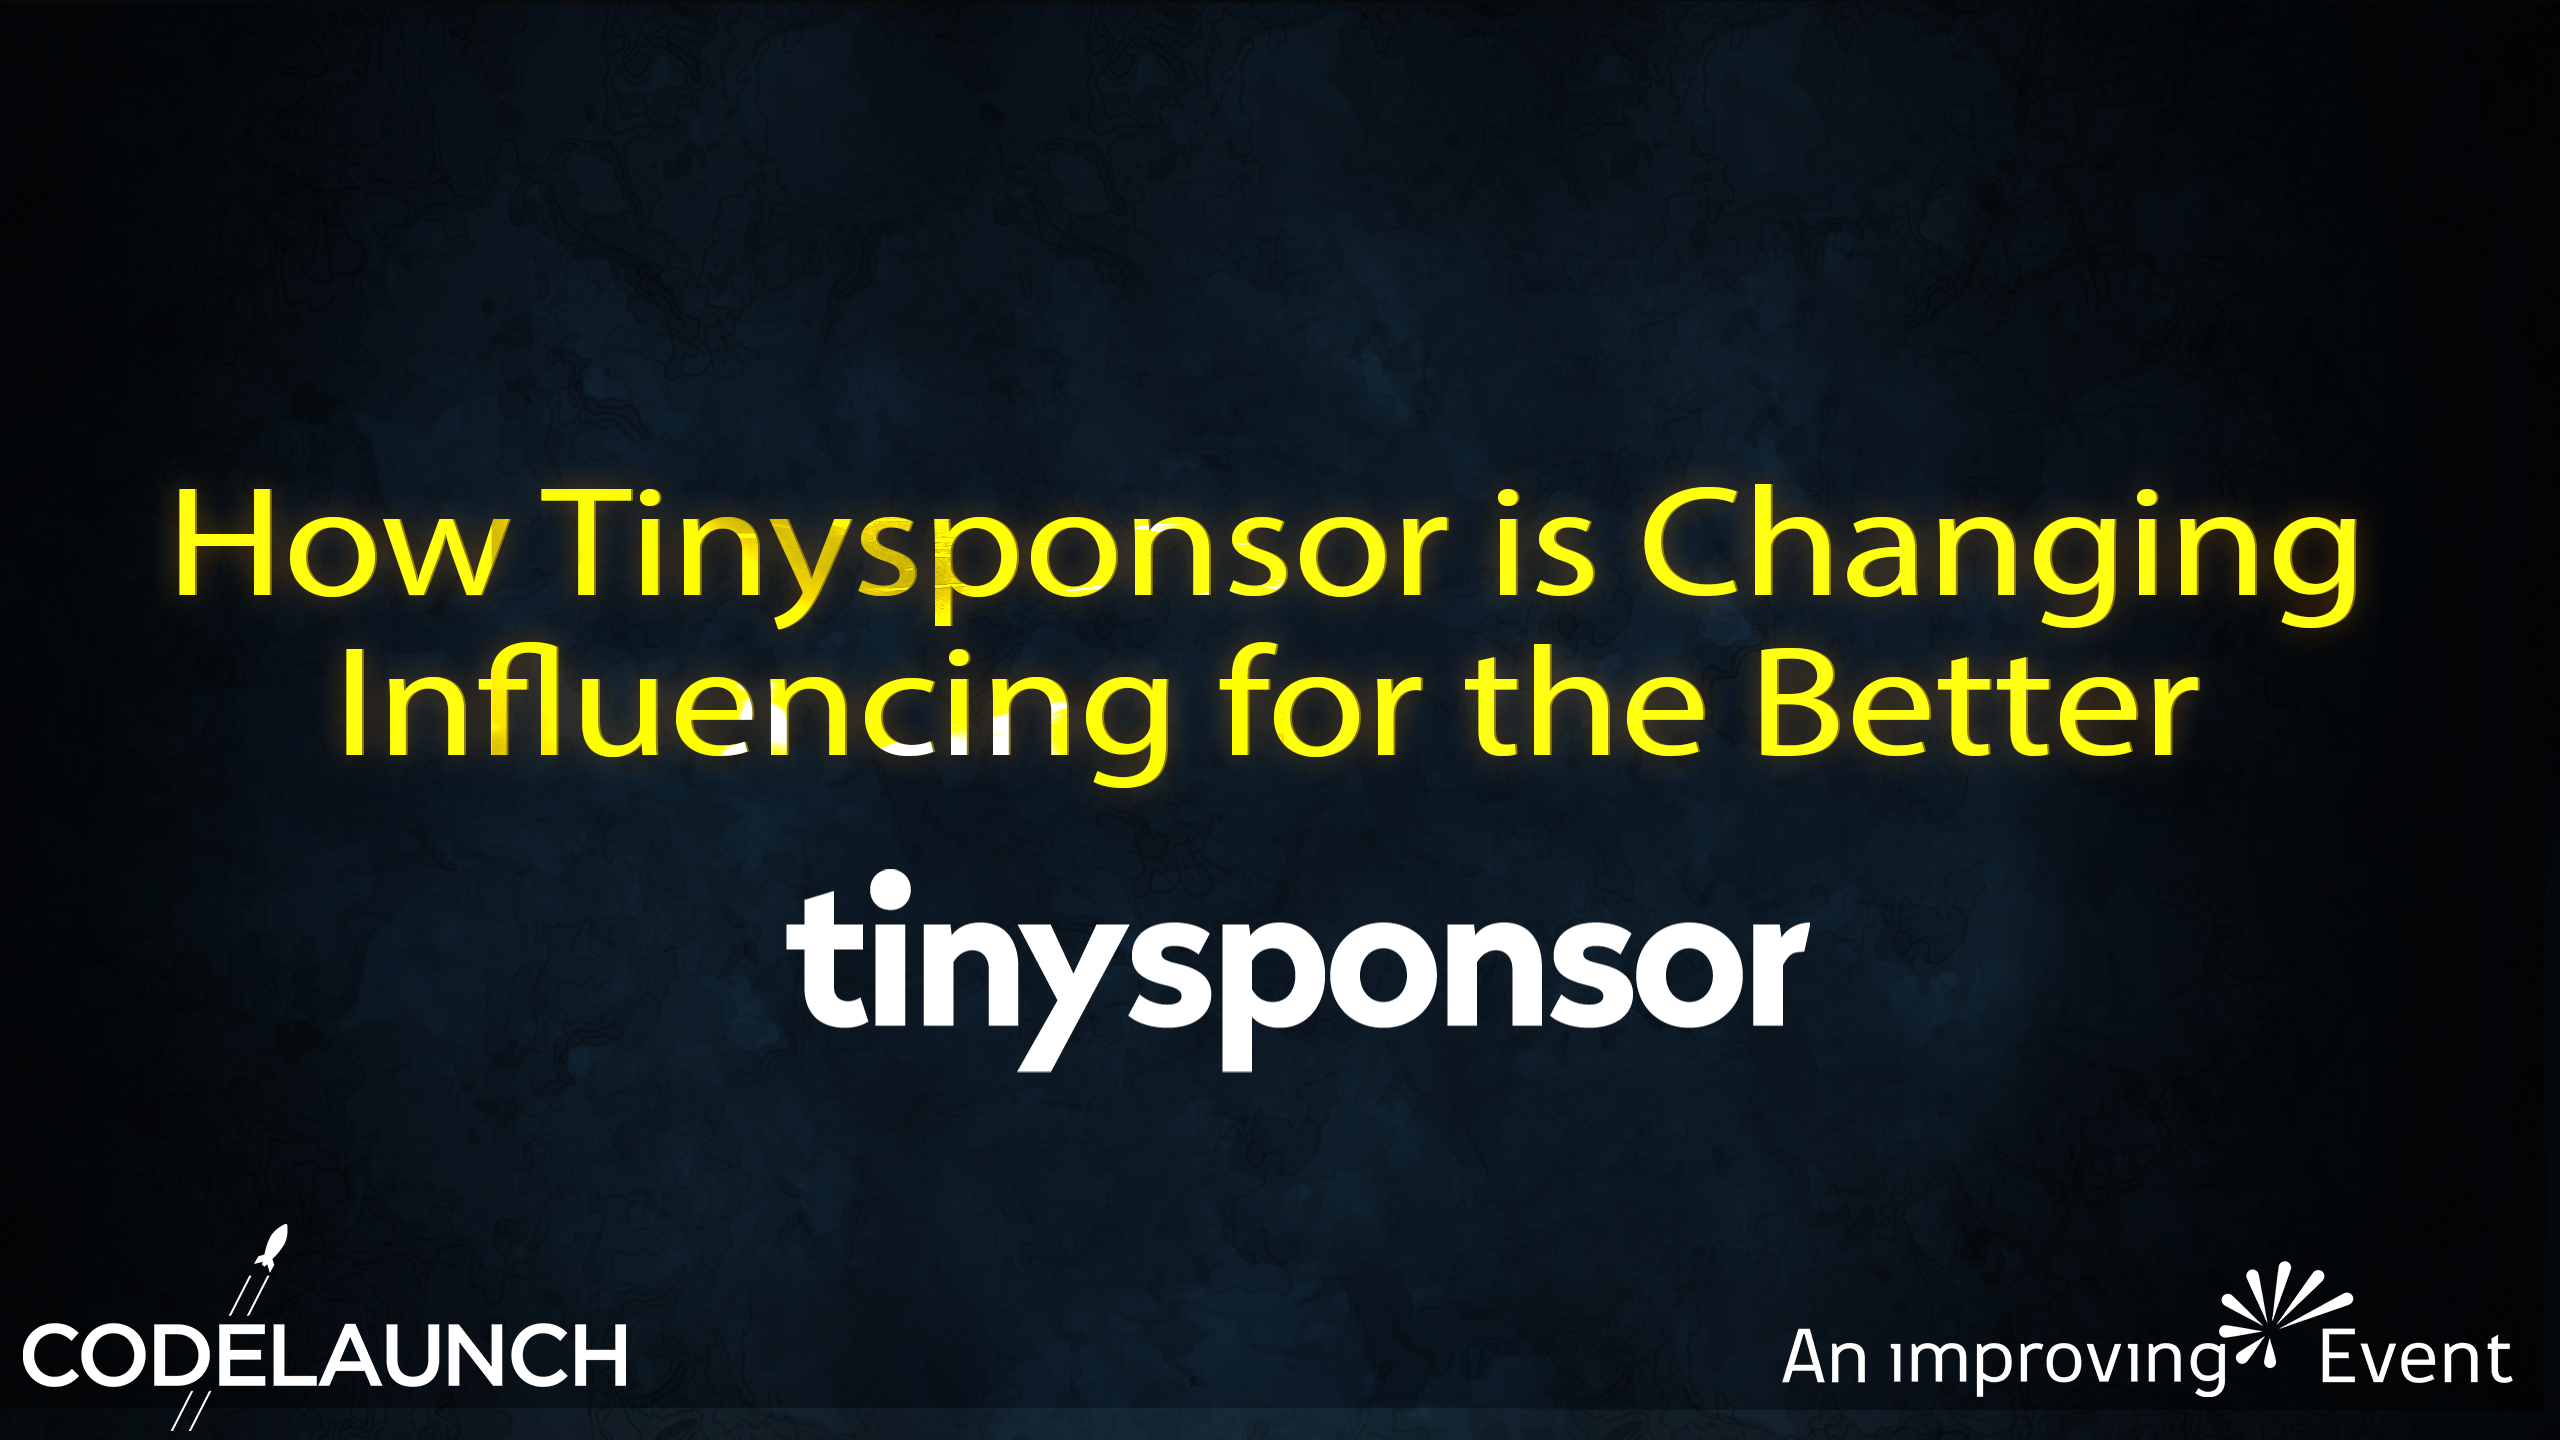 How Tinysponsor is Changing Influencing for the Better